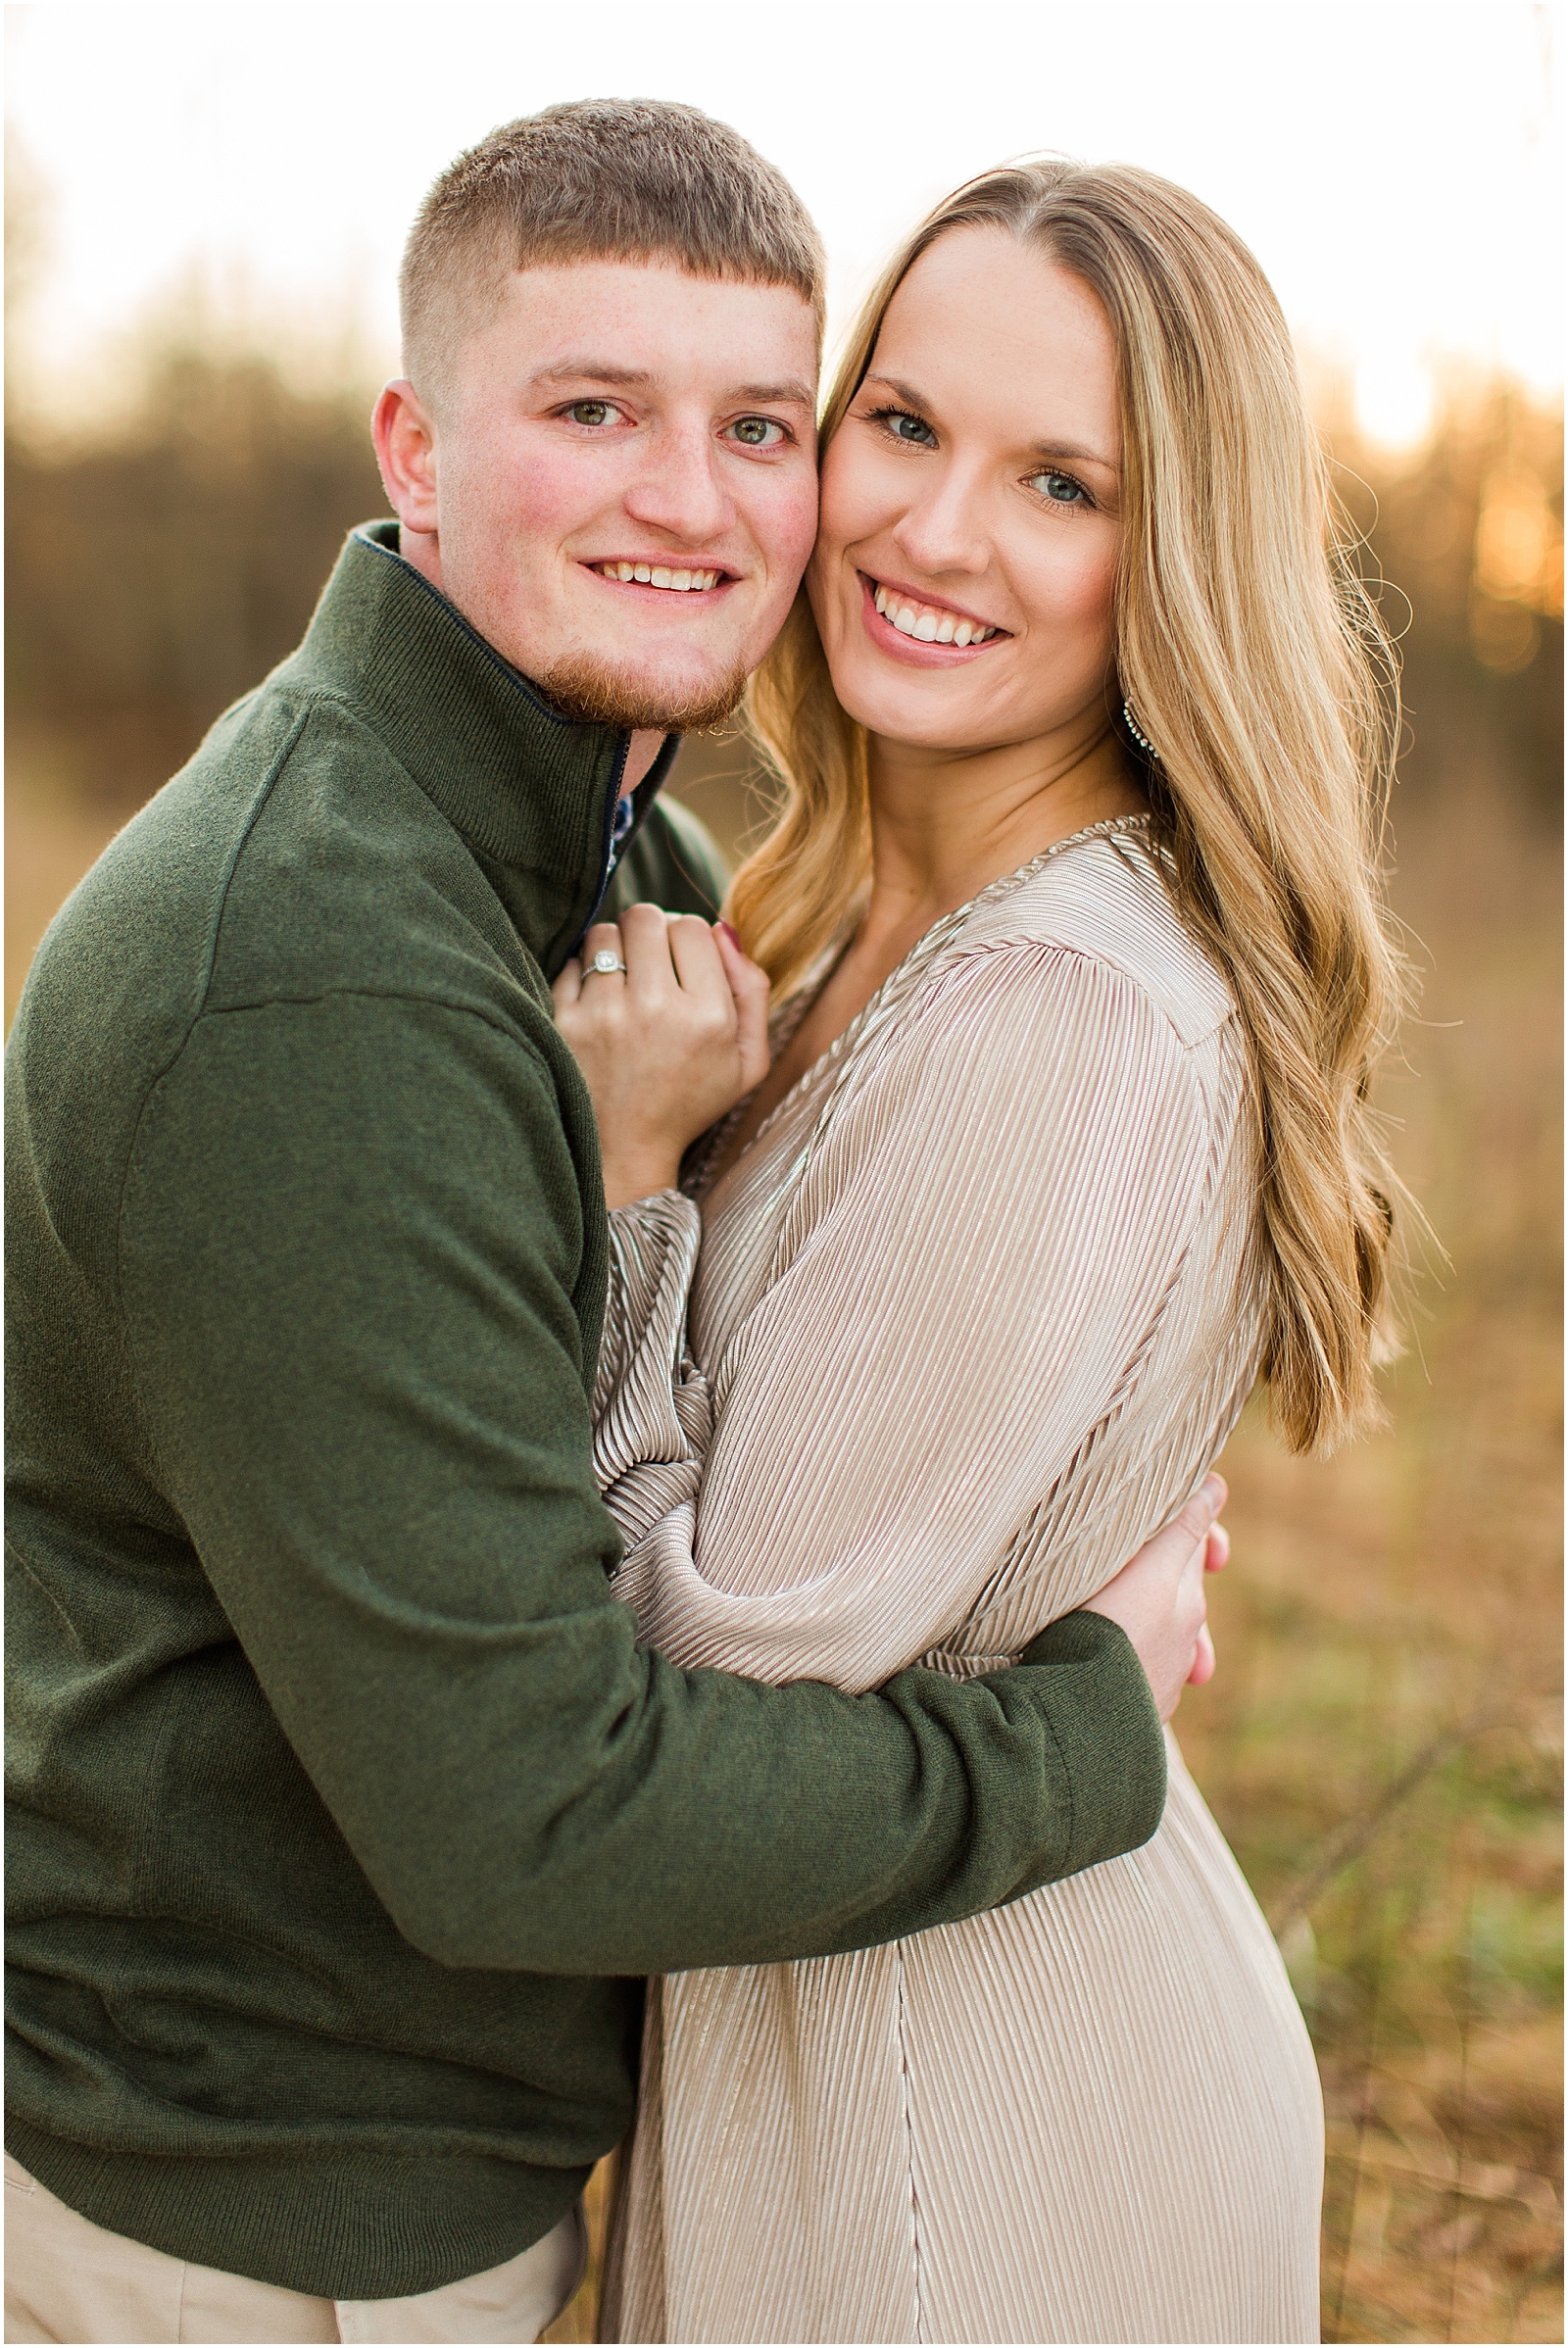 A Fall Southern Indiana Engagement Seesion | Cody and Hannah | Bret and Brandie Photography 050.jpg